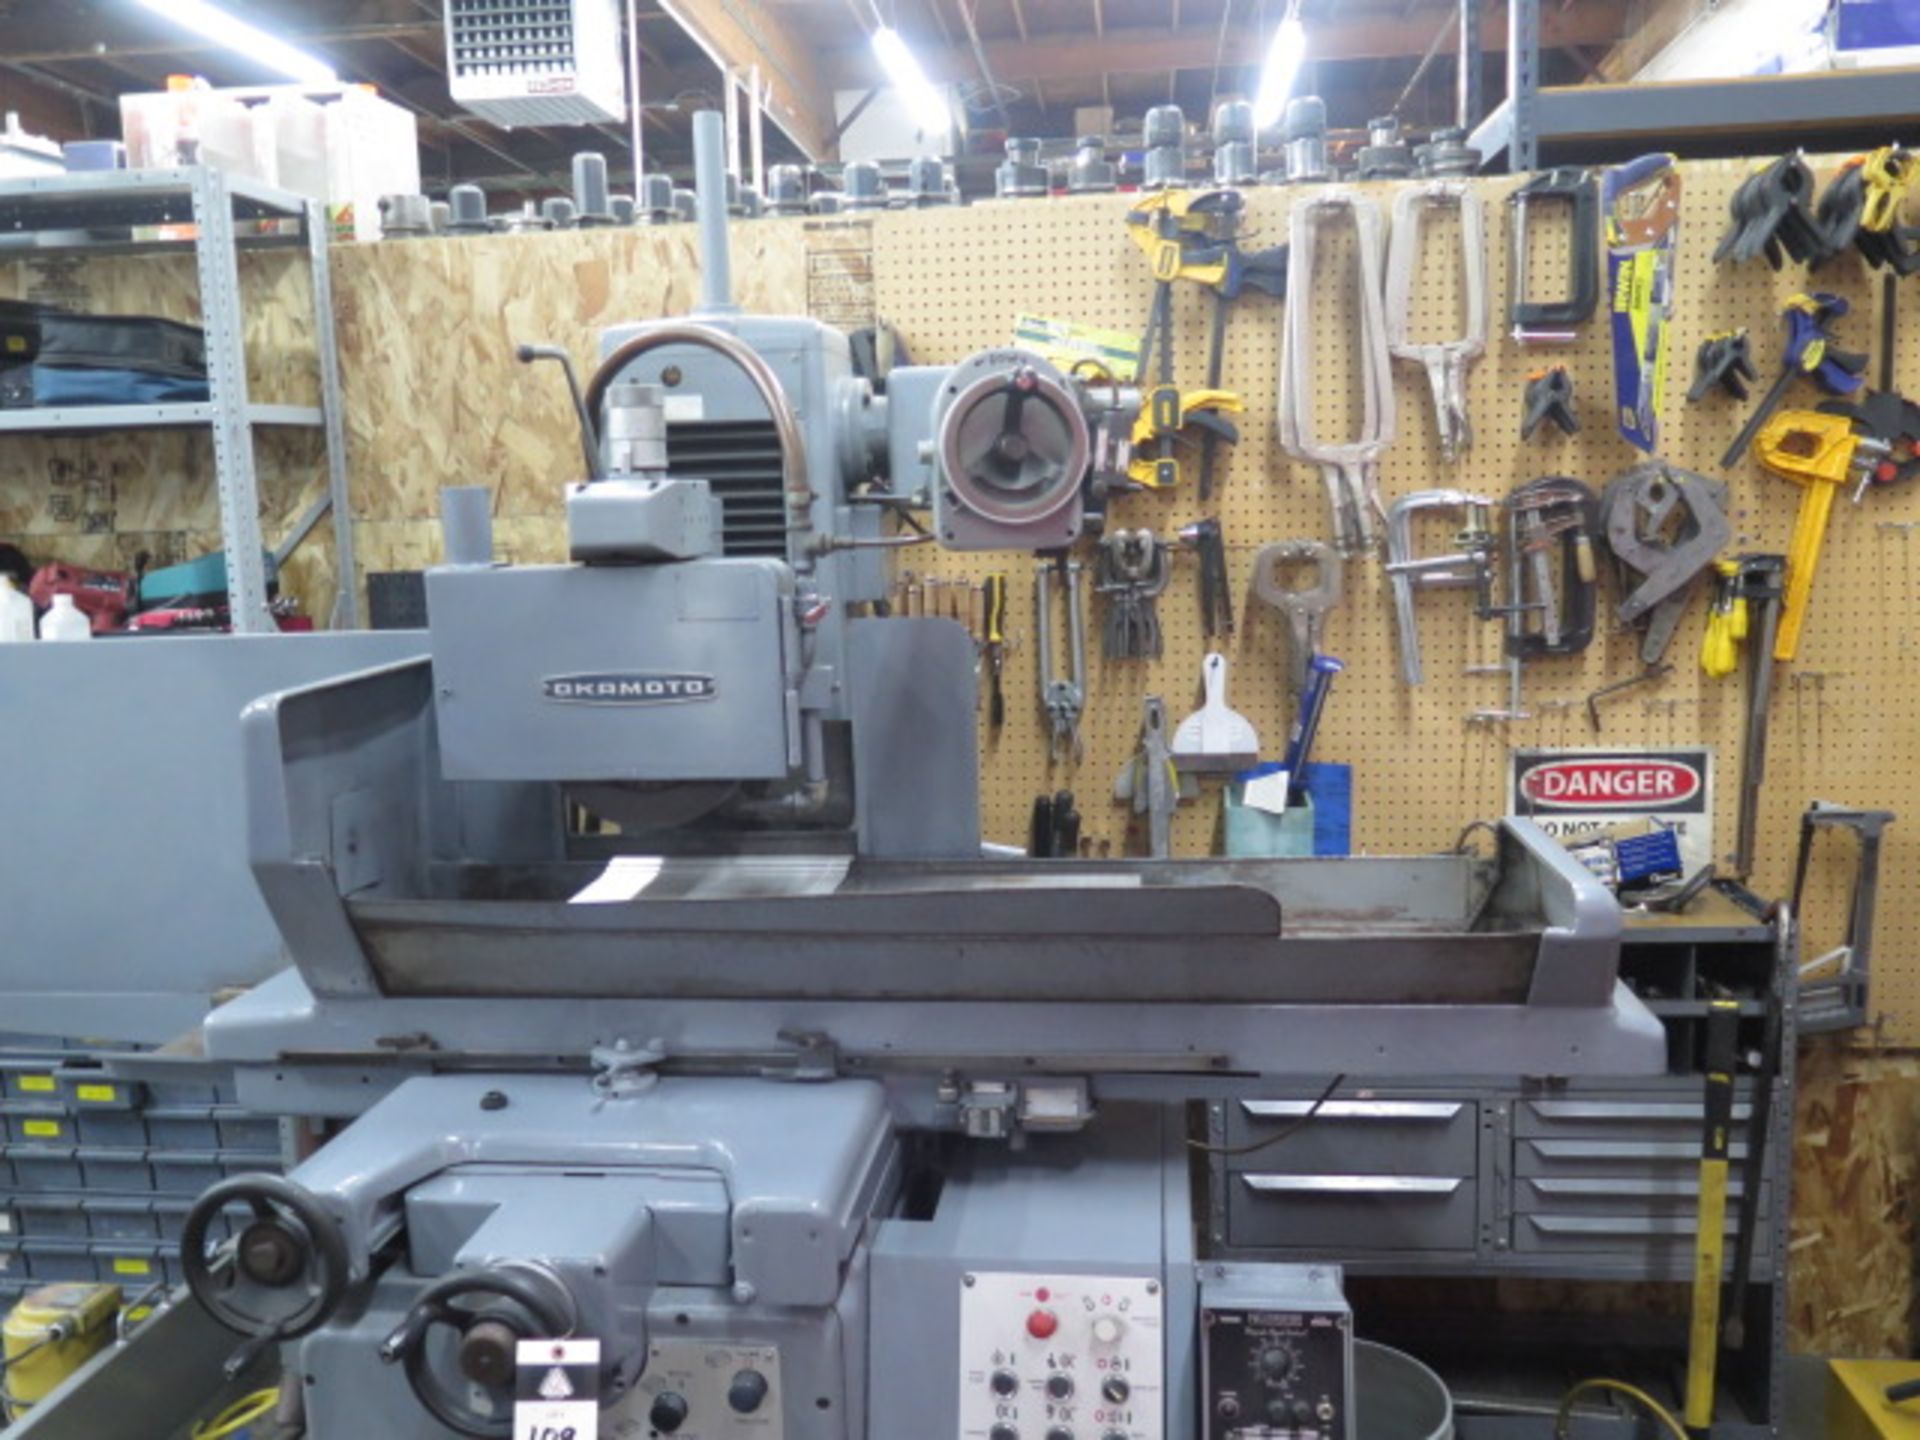 Okamoto Accugar 124 12” x 24” Automatic Hydraulic Surface Grinder s/n 8182 w/ Auto Cycles,SOLD AS IS - Image 2 of 13